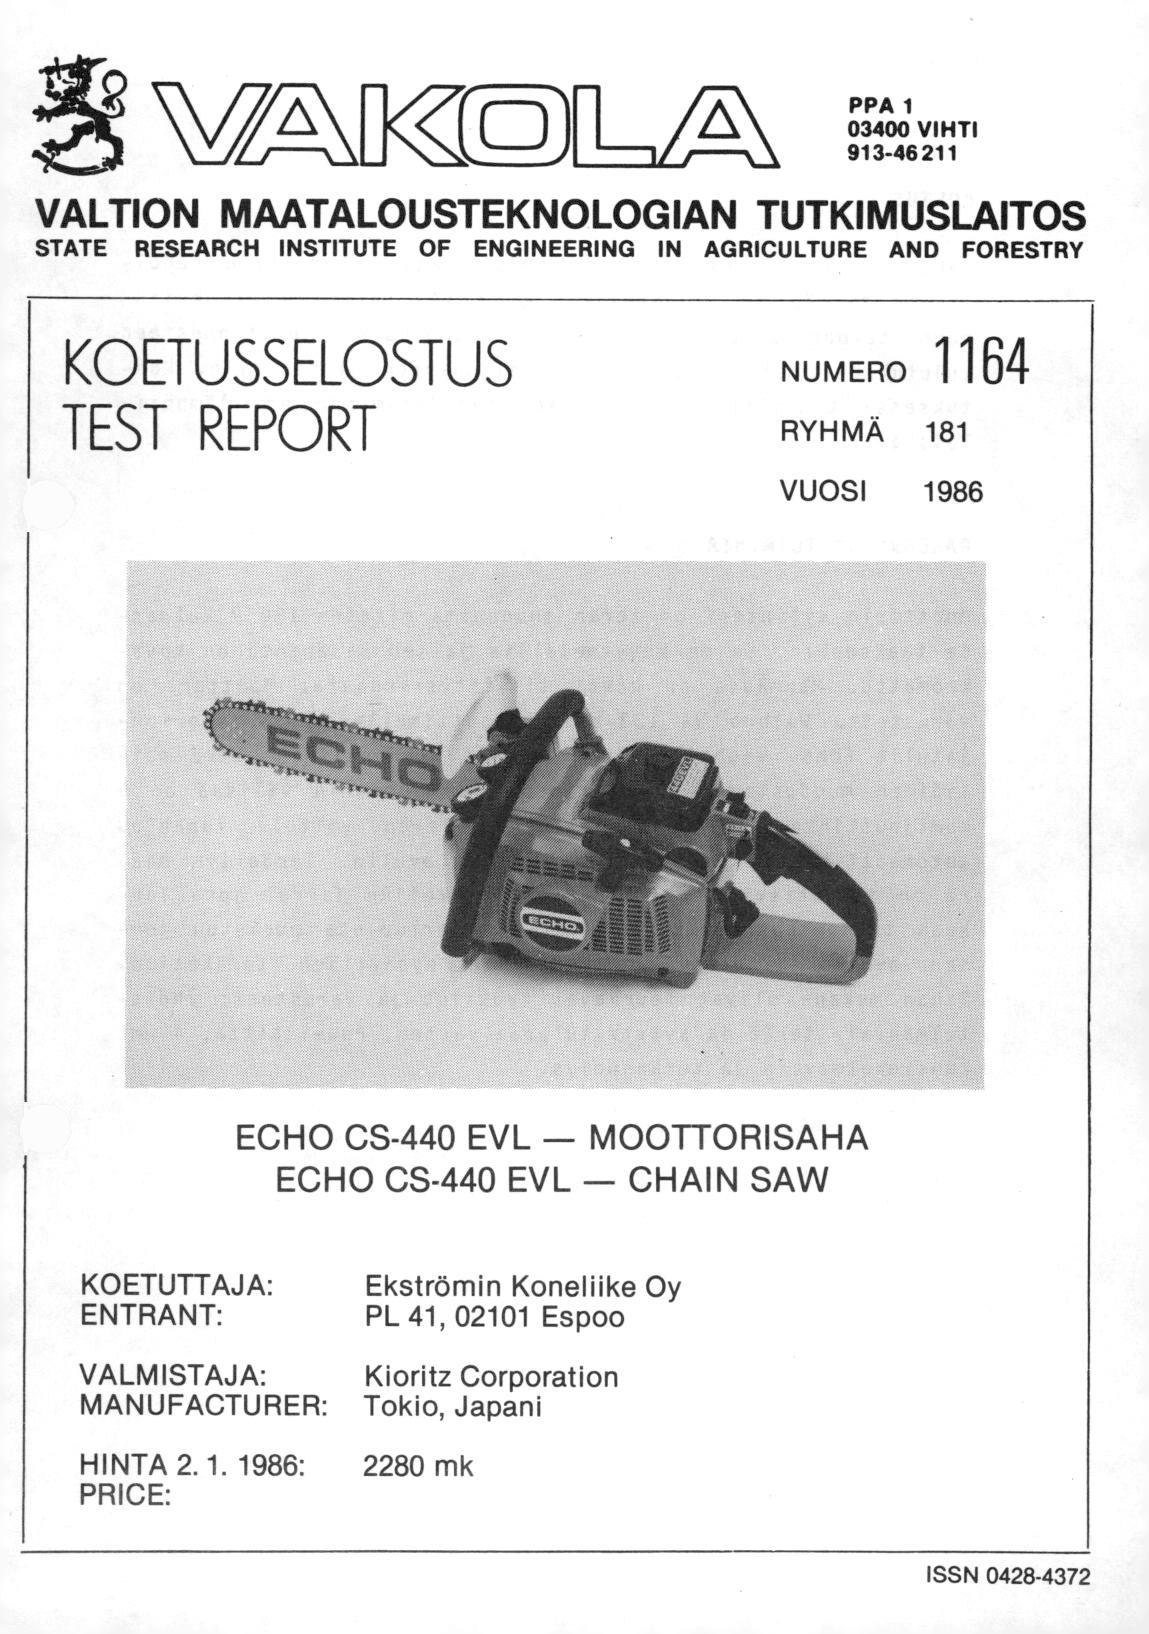 VZ-AG1K<Coi PPA 1 03400 VIHTI 913-46211 VALTION MAATALOUSTEKNOLOGIAN TUTKIMUSLAITOS STATE RESEARCH INSTITUTE OF ENGINEERING IN AGRICULTURE AND FORESTRY KOETUSSELOSTUS TEST REPORT NUMERO 1164 RYHMÄ